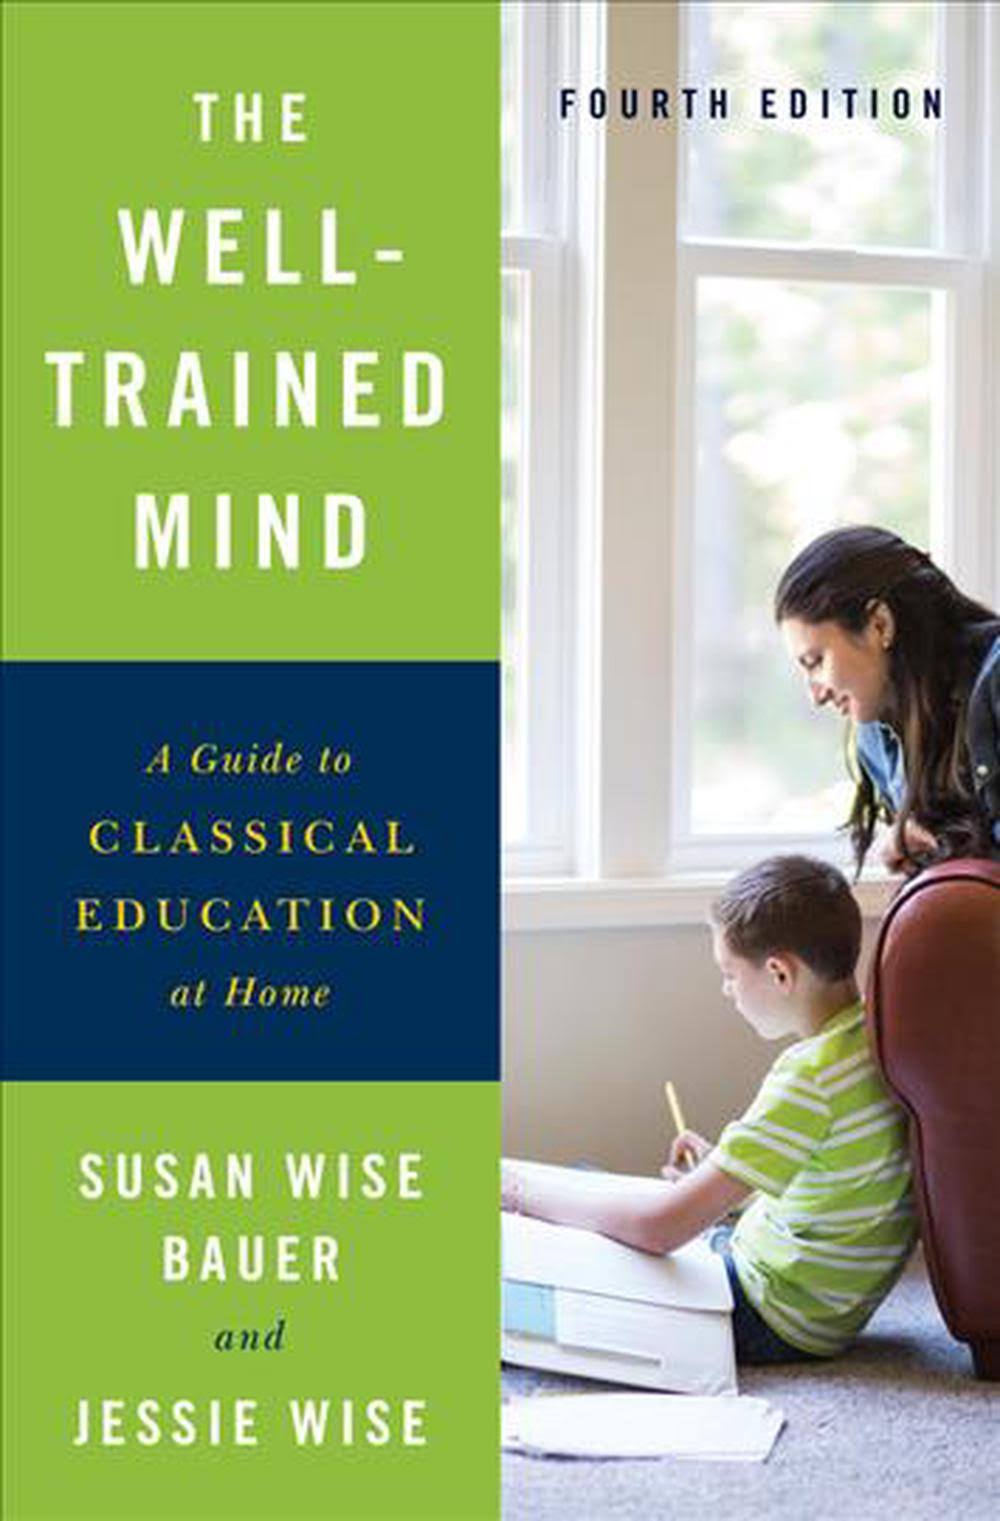 The Well-Trained Mind: A Guide To Classical Education At Home [Book]